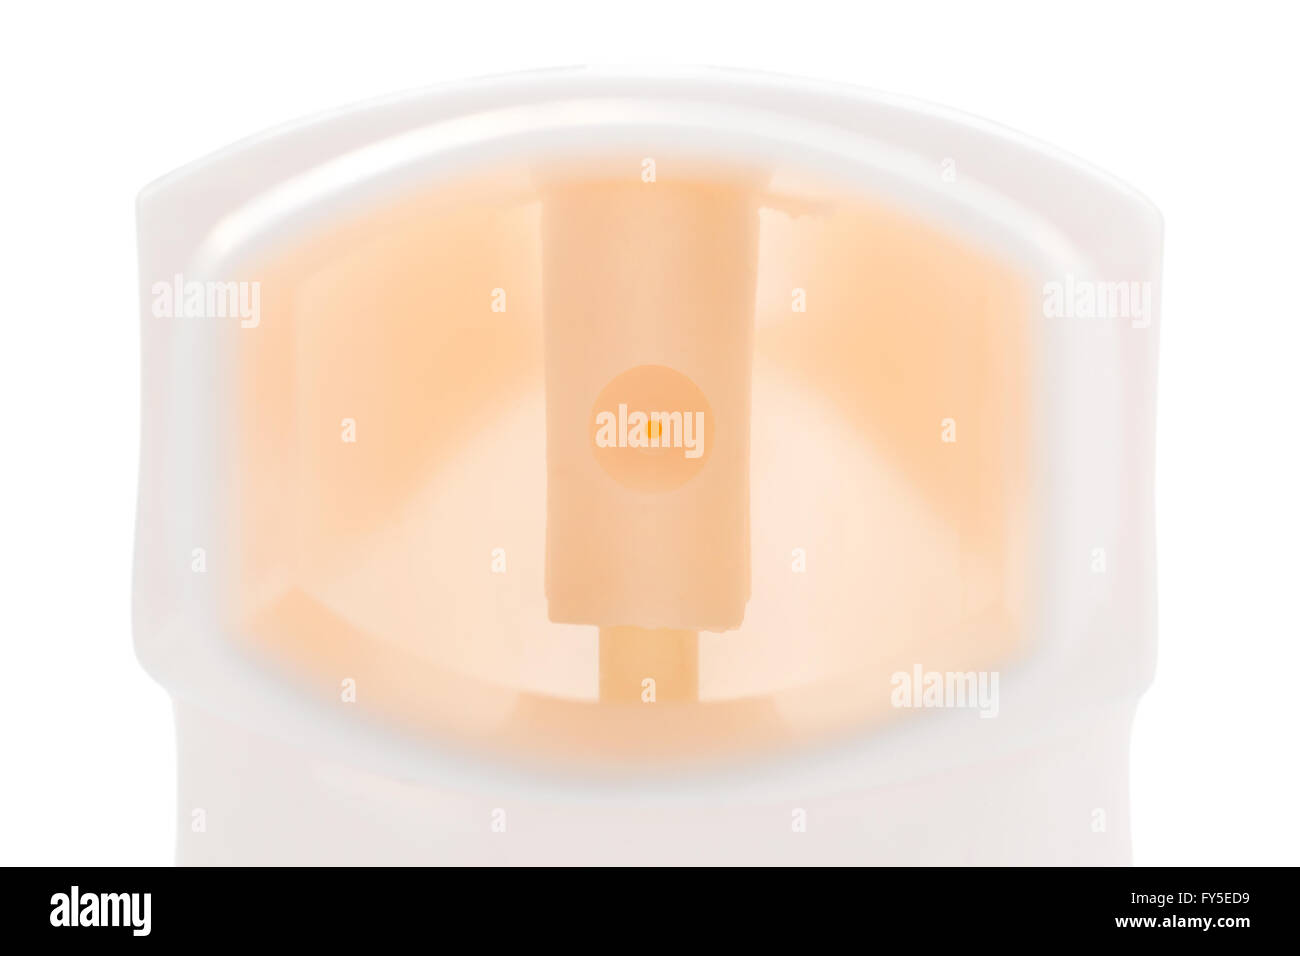 Extremal close up of the asthma inhaler spray mouthpiece isolated on white with clipping path Stock Photo